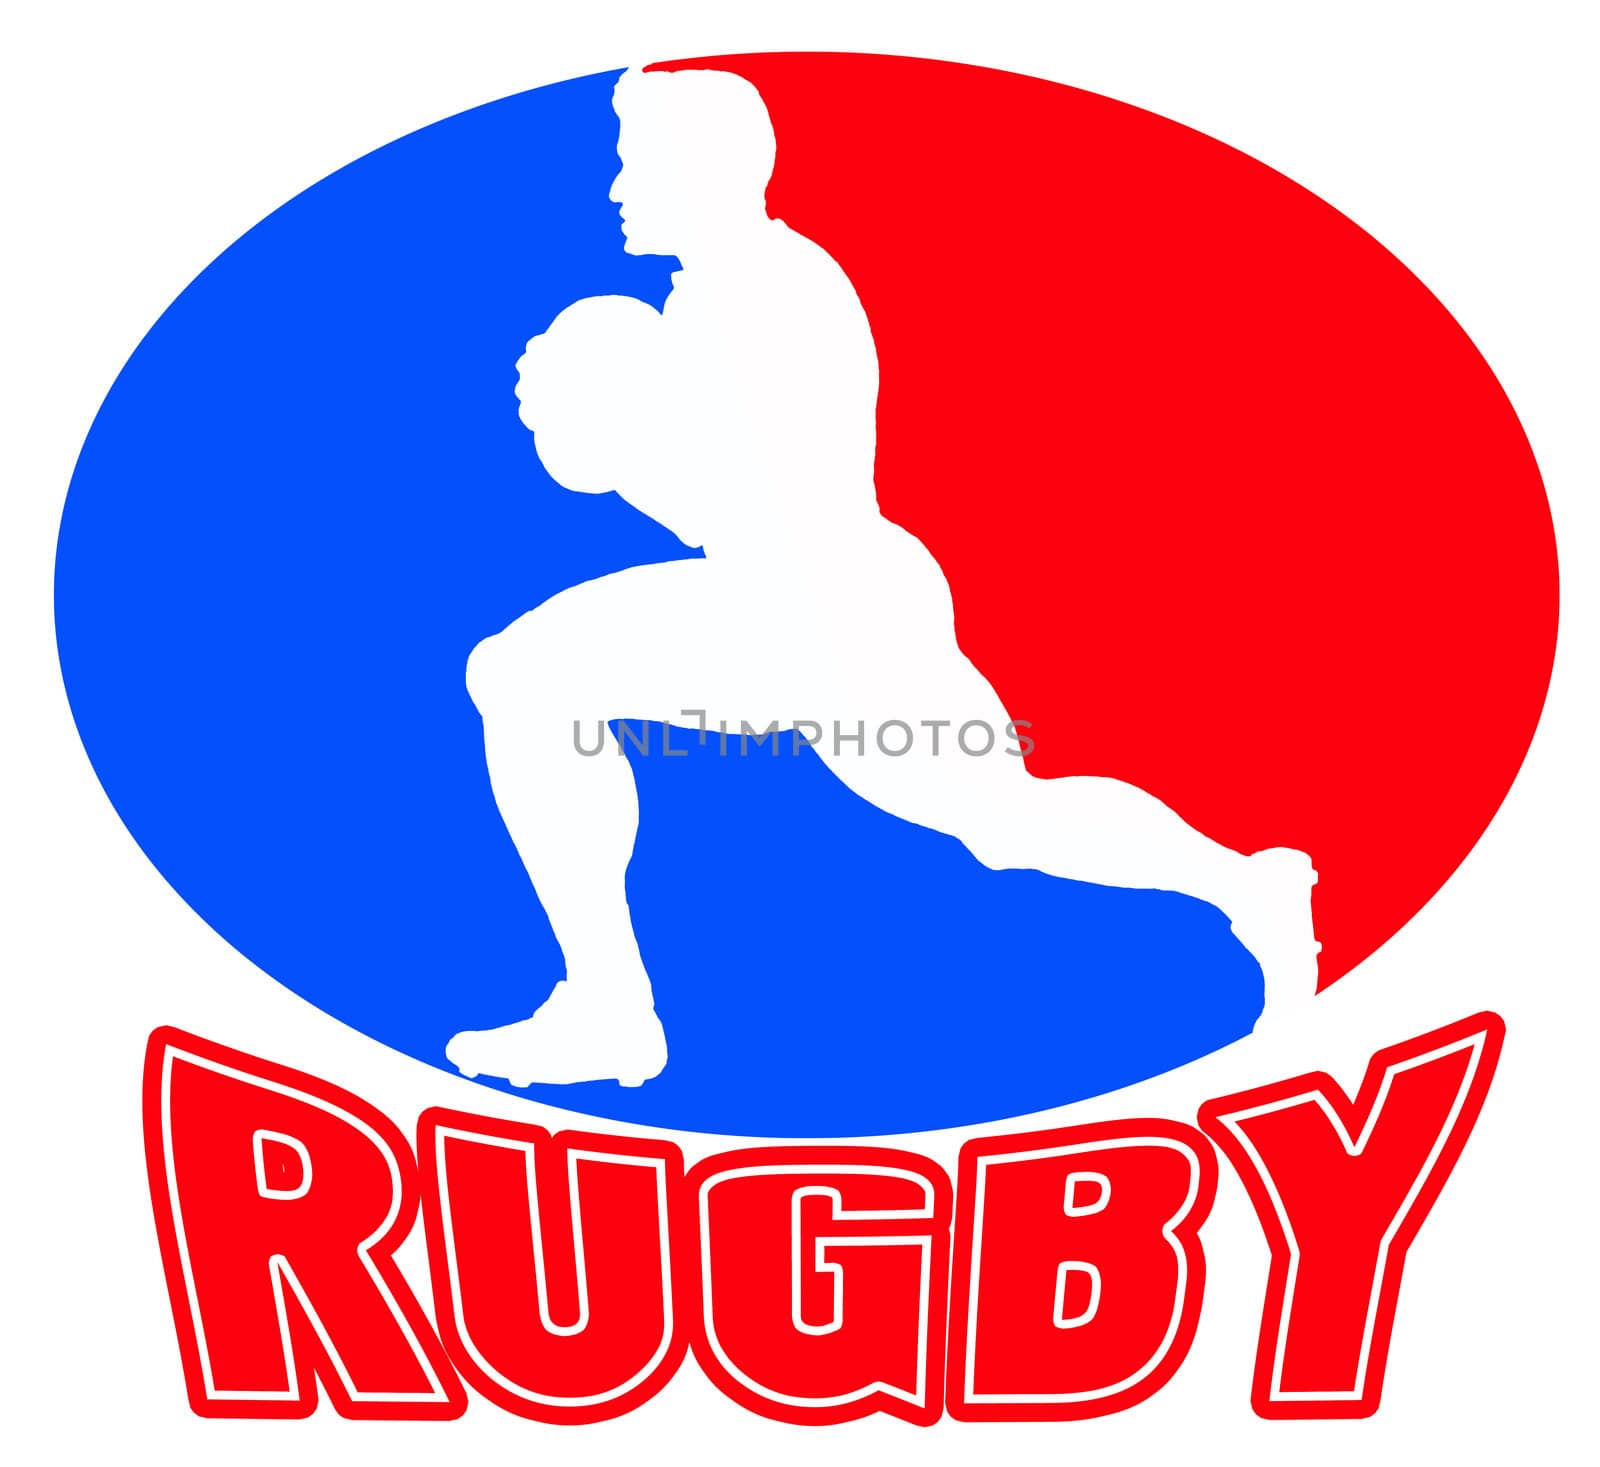 side view silhouette of a rugby player running with ball set inside a red and blue oval shape with words "rugby"